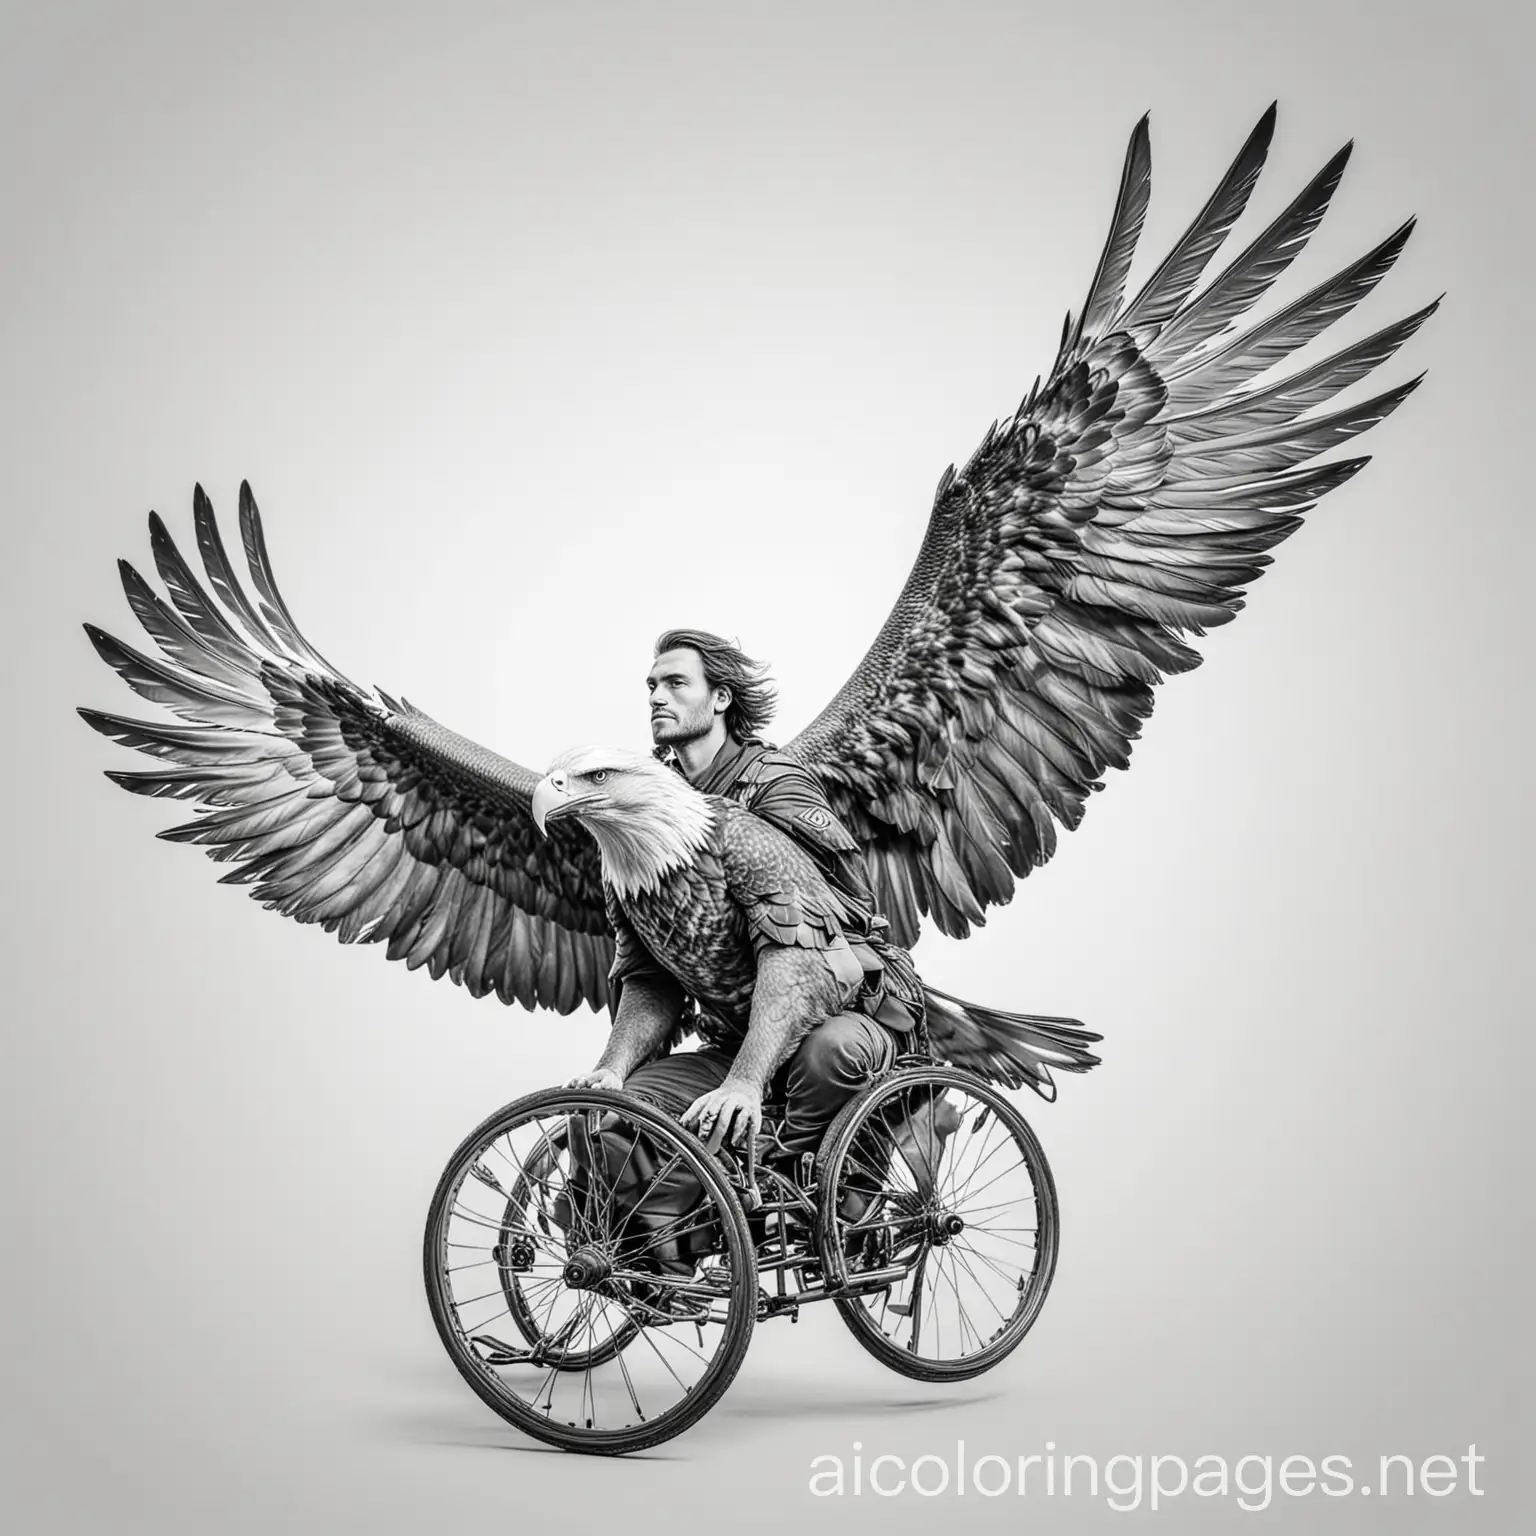 Man-in-Wheelchair-Riding-Eagle-Coloring-Page